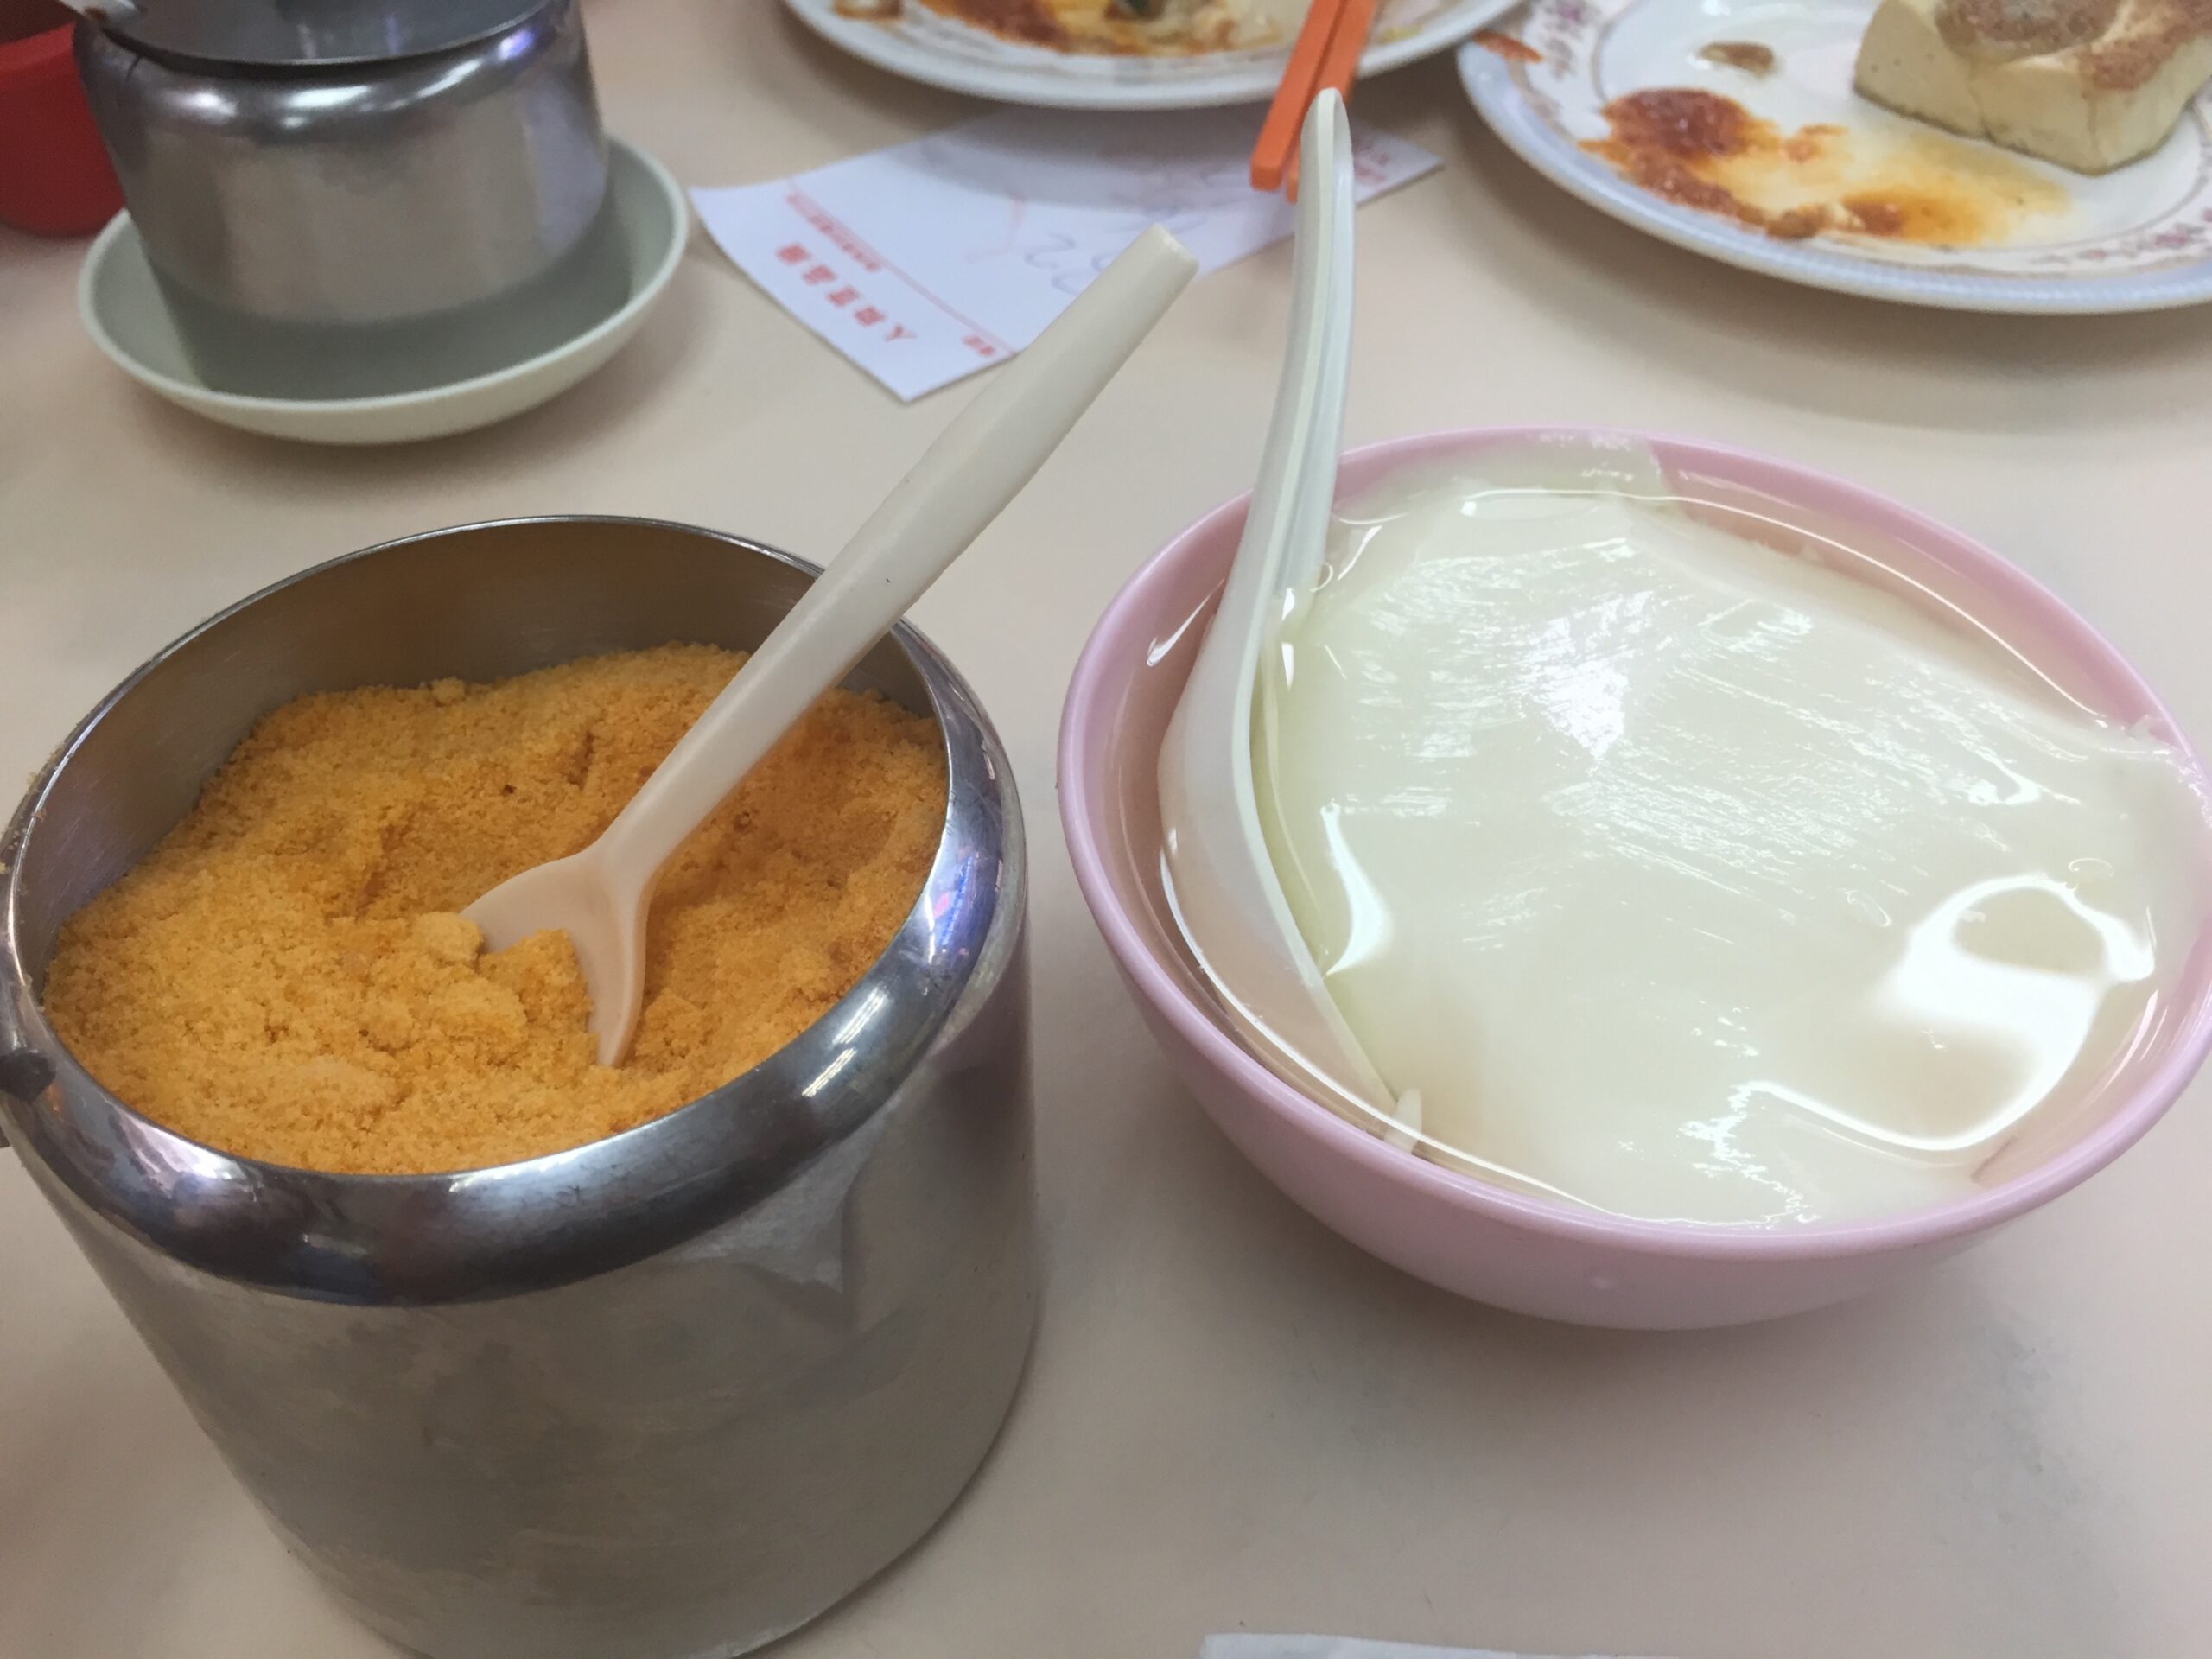 Bean curd dessert with brown sugar can be found at most Hong Kong cafes.